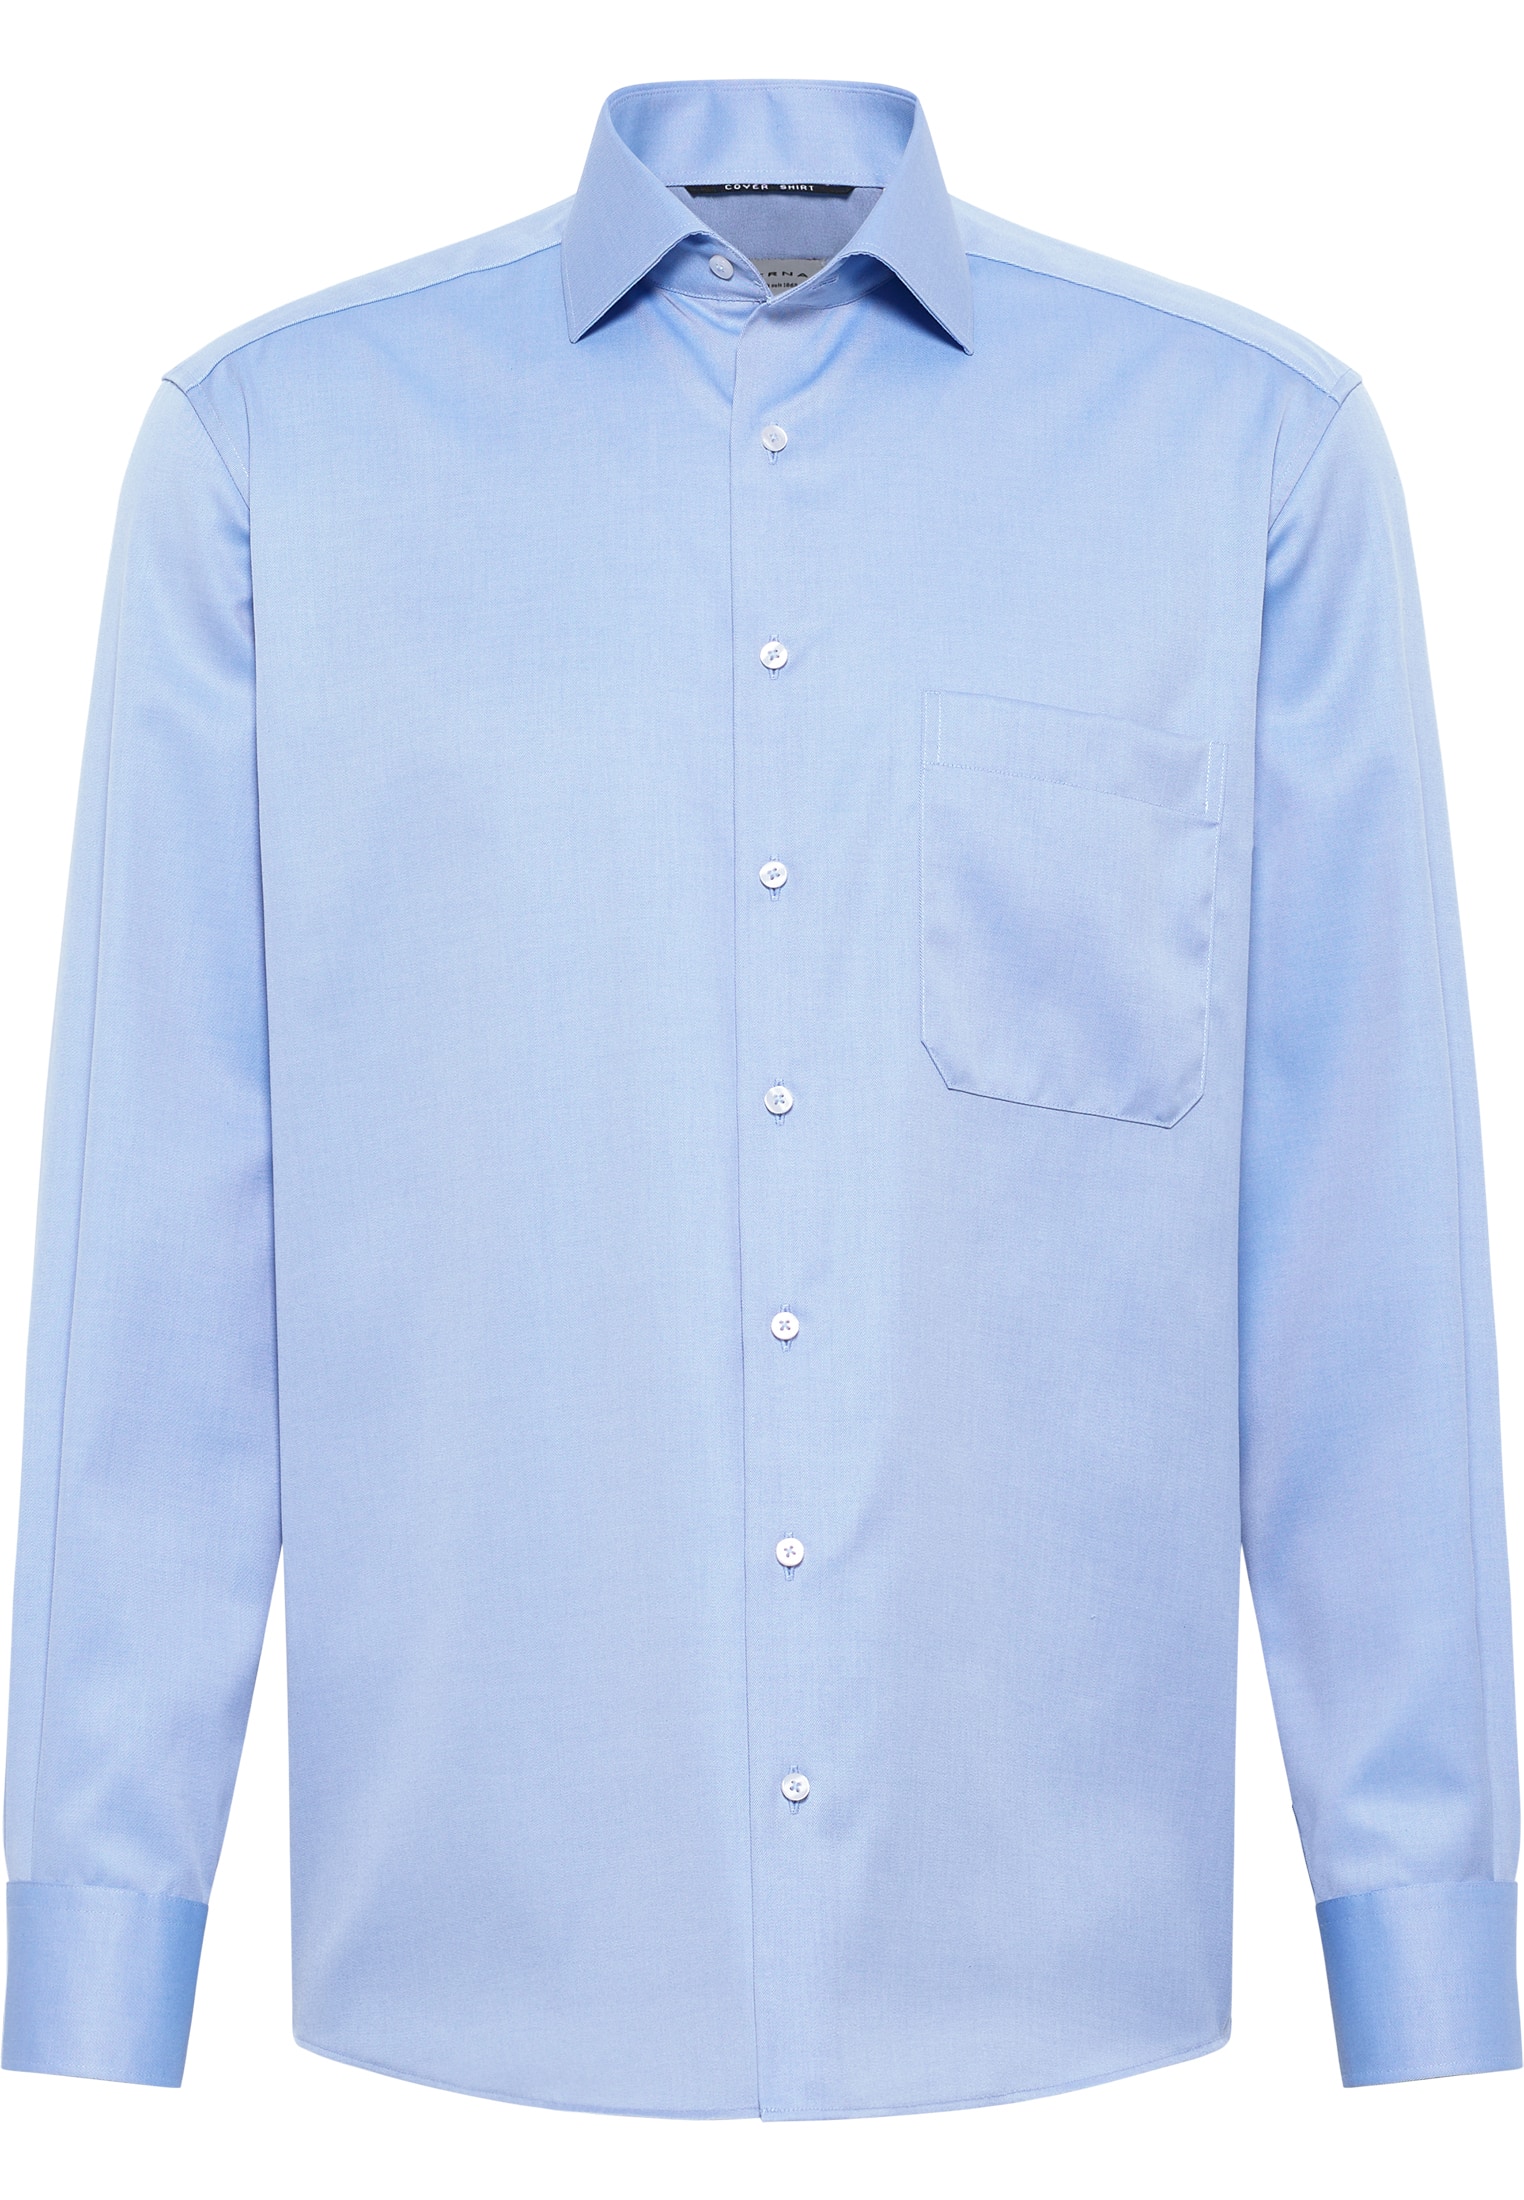 COMFORT FIT Cover Shirt in blue plain